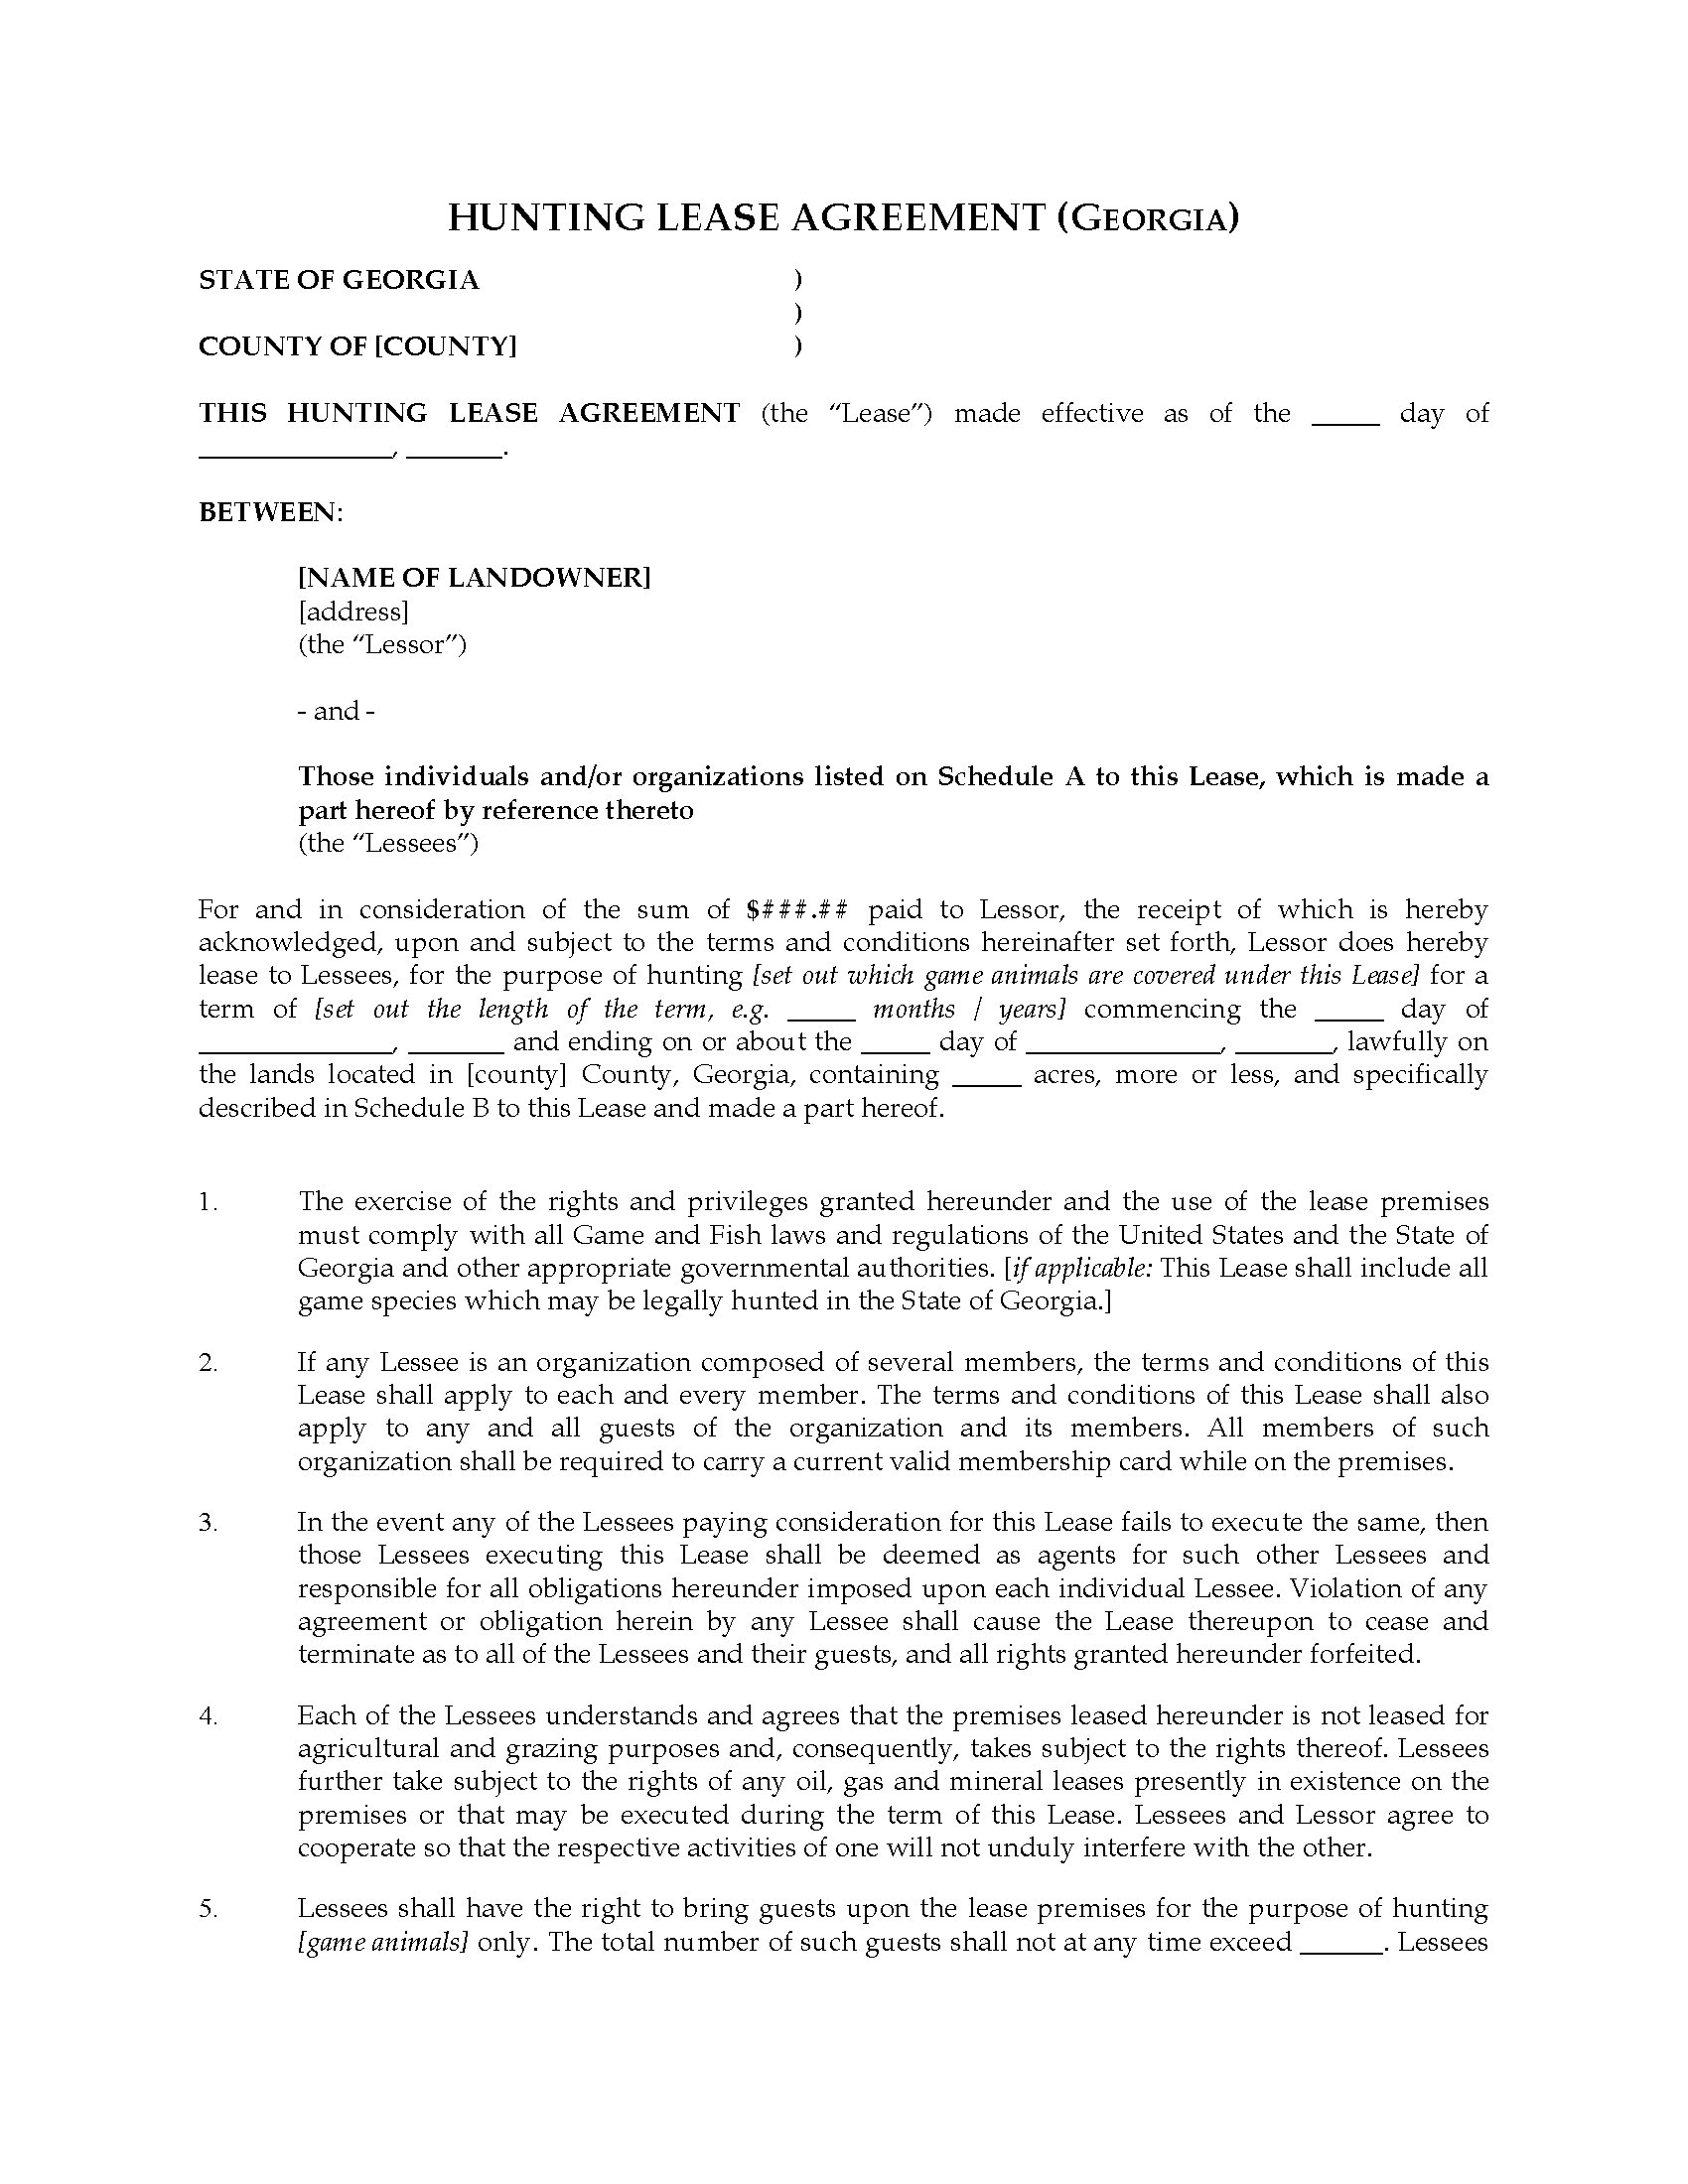 Hunting Lease Agreement Legal Forms and Business Templates